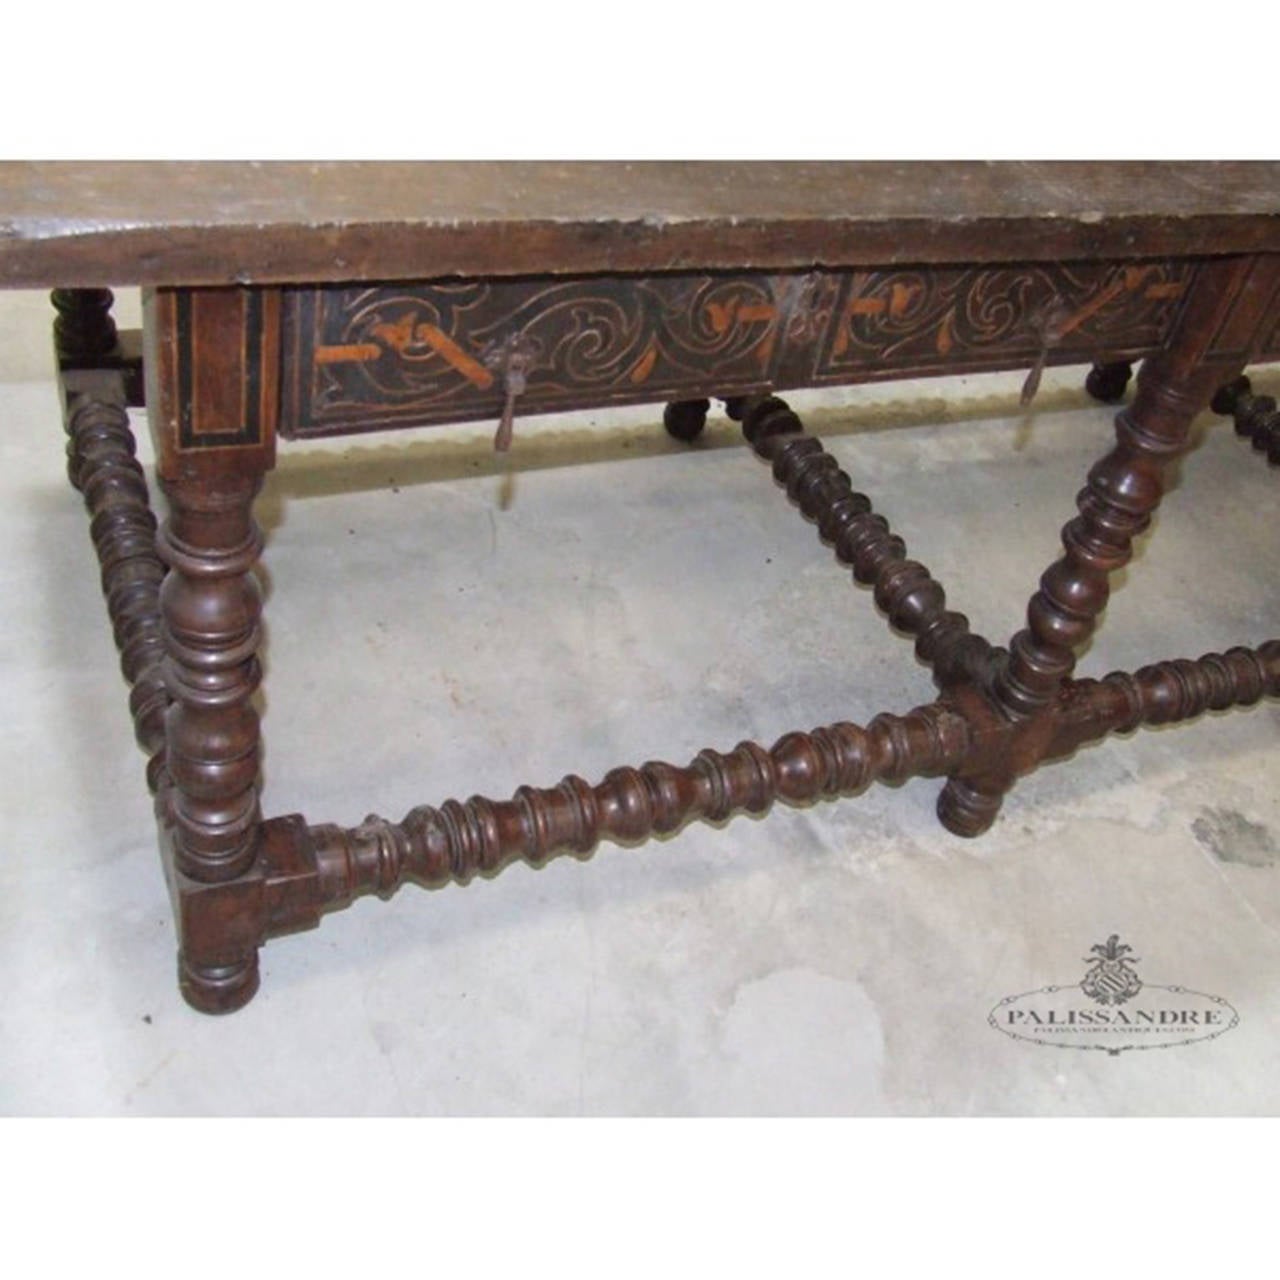 Dining table made large walnut. It consists of a large board which is supported on eight turned legs that are joined together by “chambranas” also turned. It has several drawers with inlaid decoration in gable based foliate scrolls and elongated